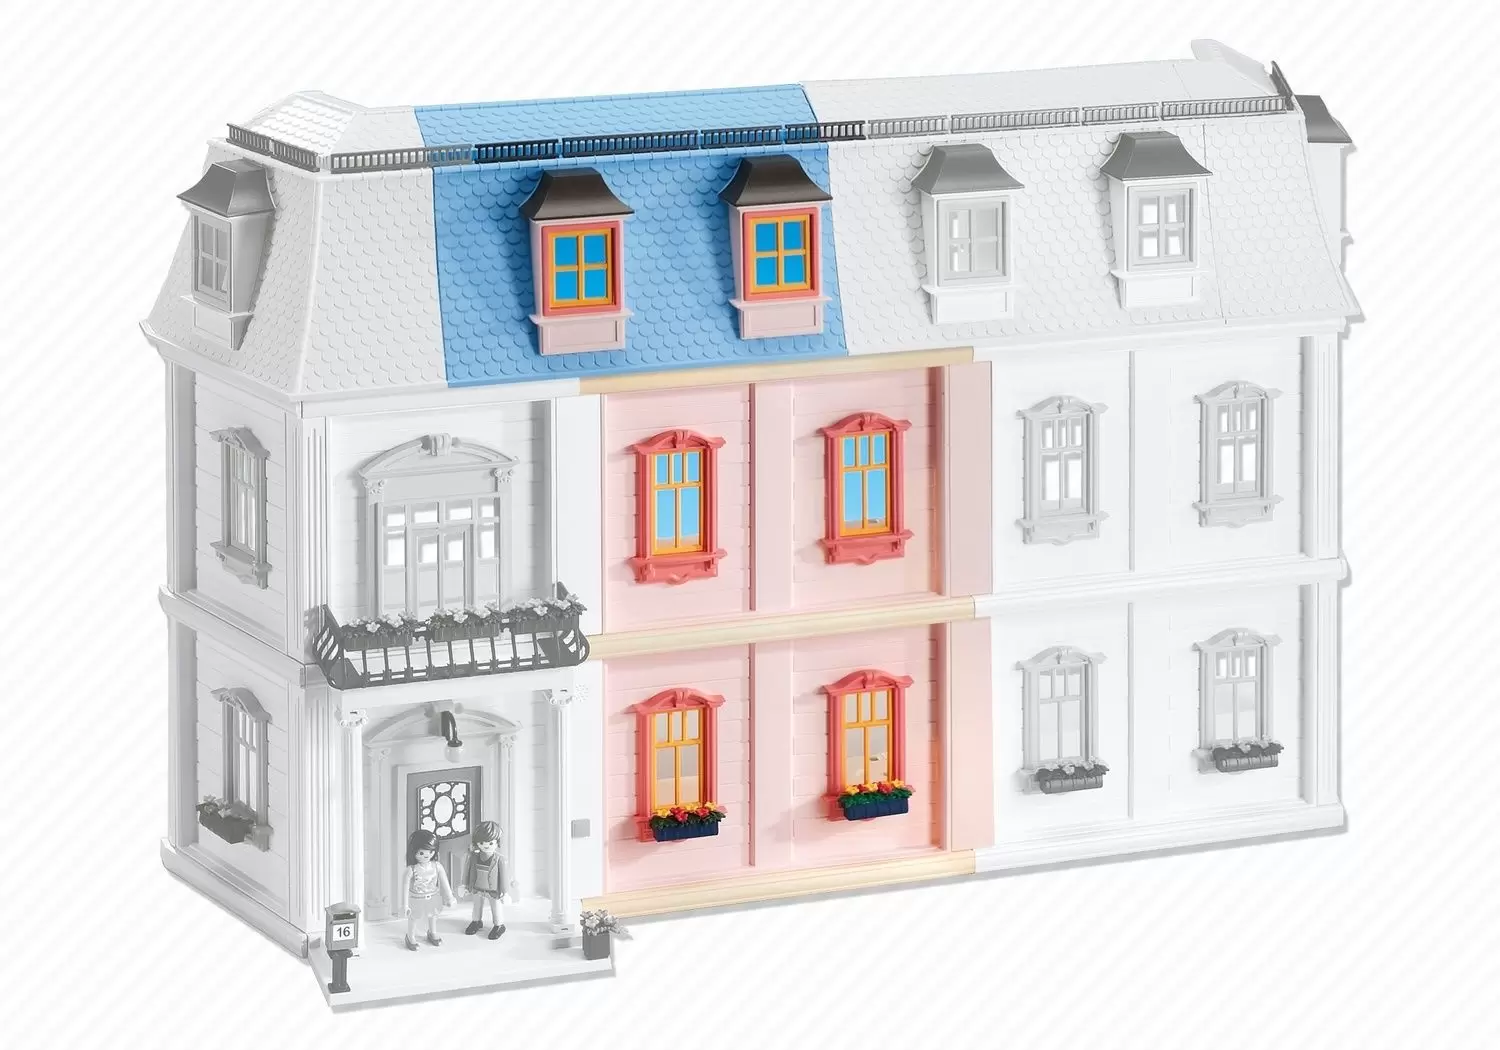 Playmobil Accessories & decorations - Horizontal Extension for Deluxe Dollhouse (5303)